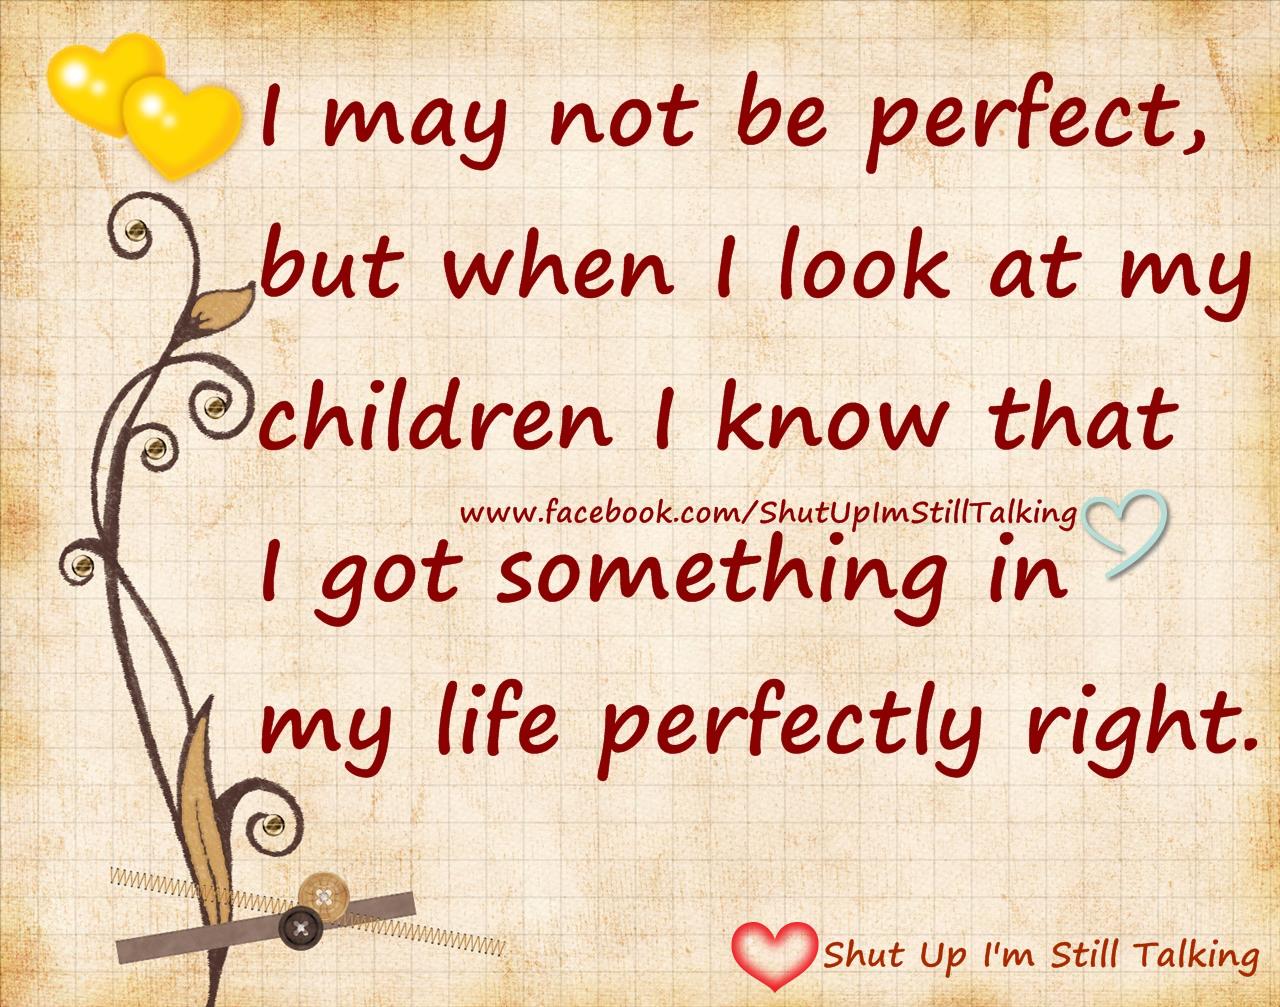 somethinginmylifeisperfect 1 - Beautiful Quotes, Proverbs, Sayings